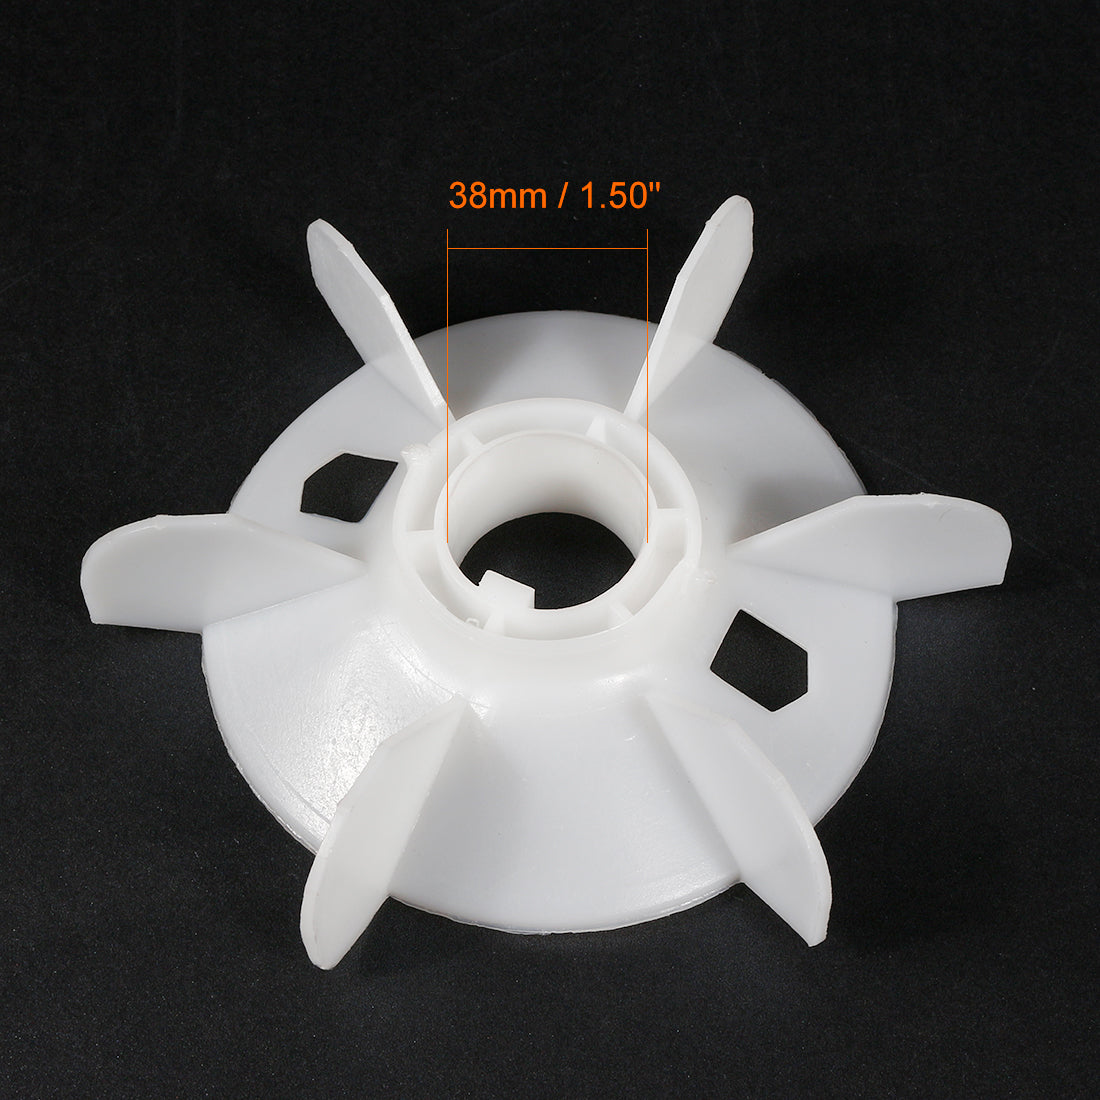 uxcell Uxcell 1Pcs 180*38mm D Shaft Replacement White Plastic 6 Impeller Motor Fan Vane